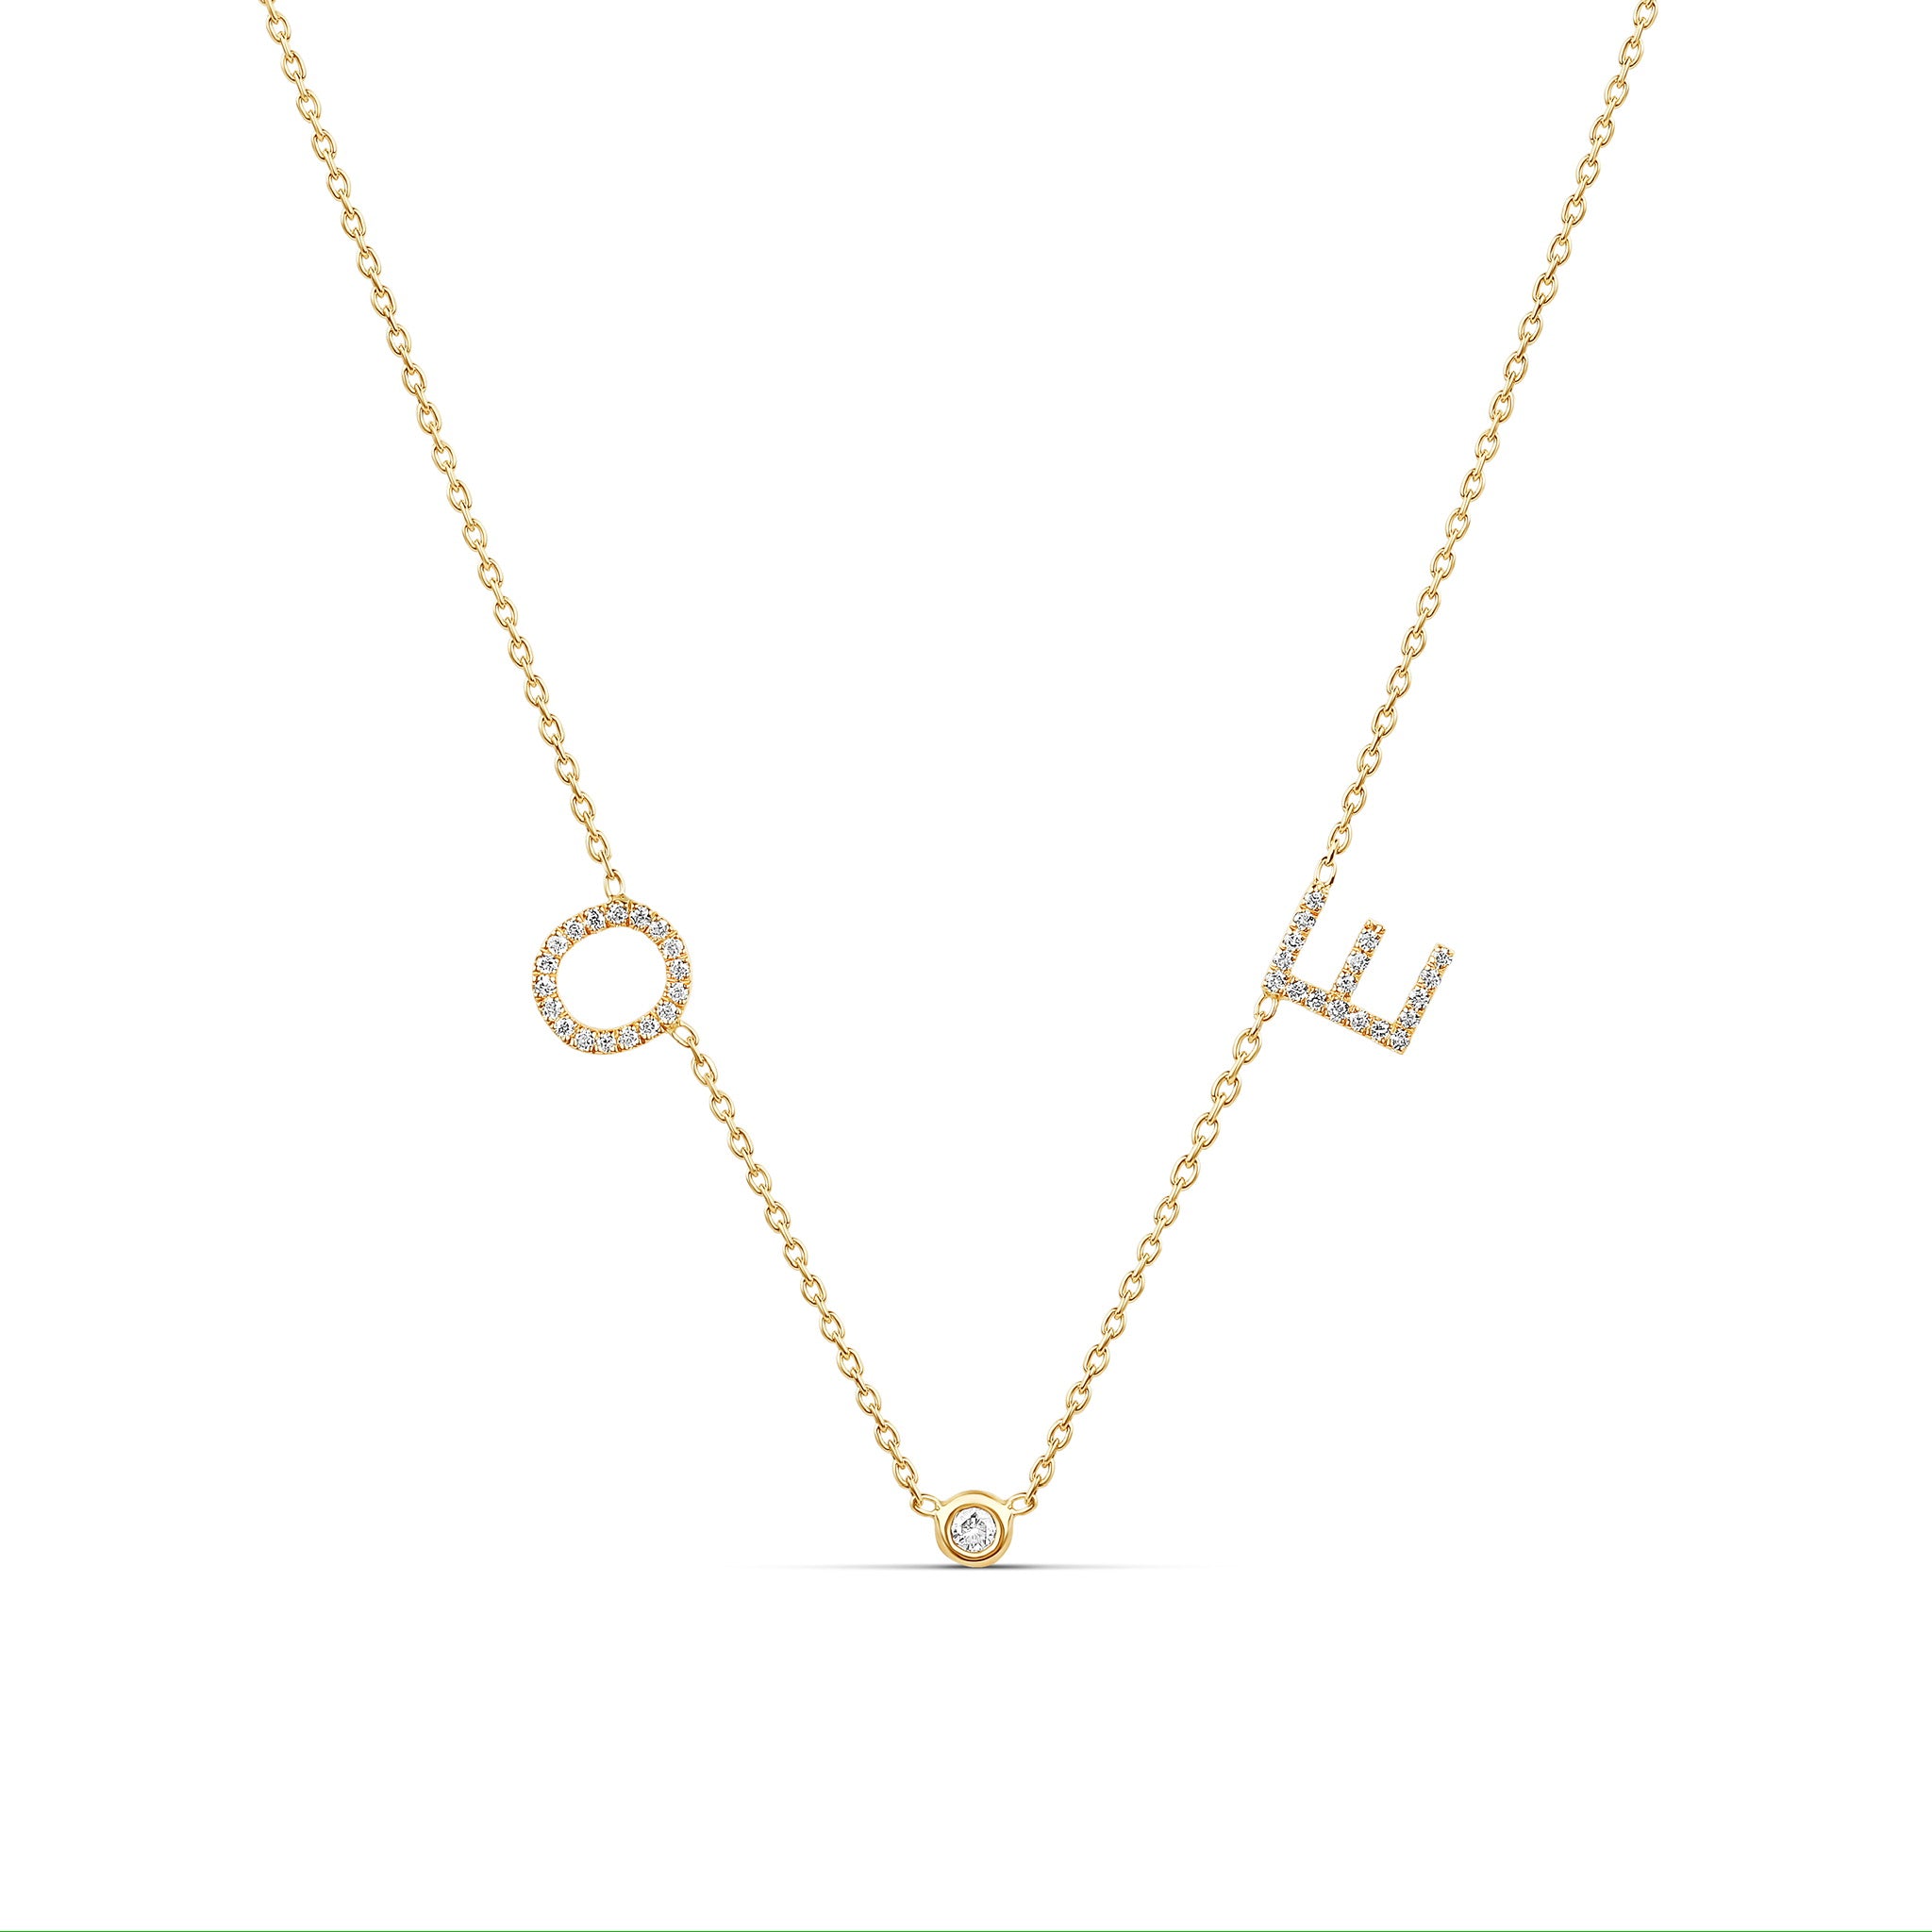 Diamond Couple's Initials and Charm Necklace